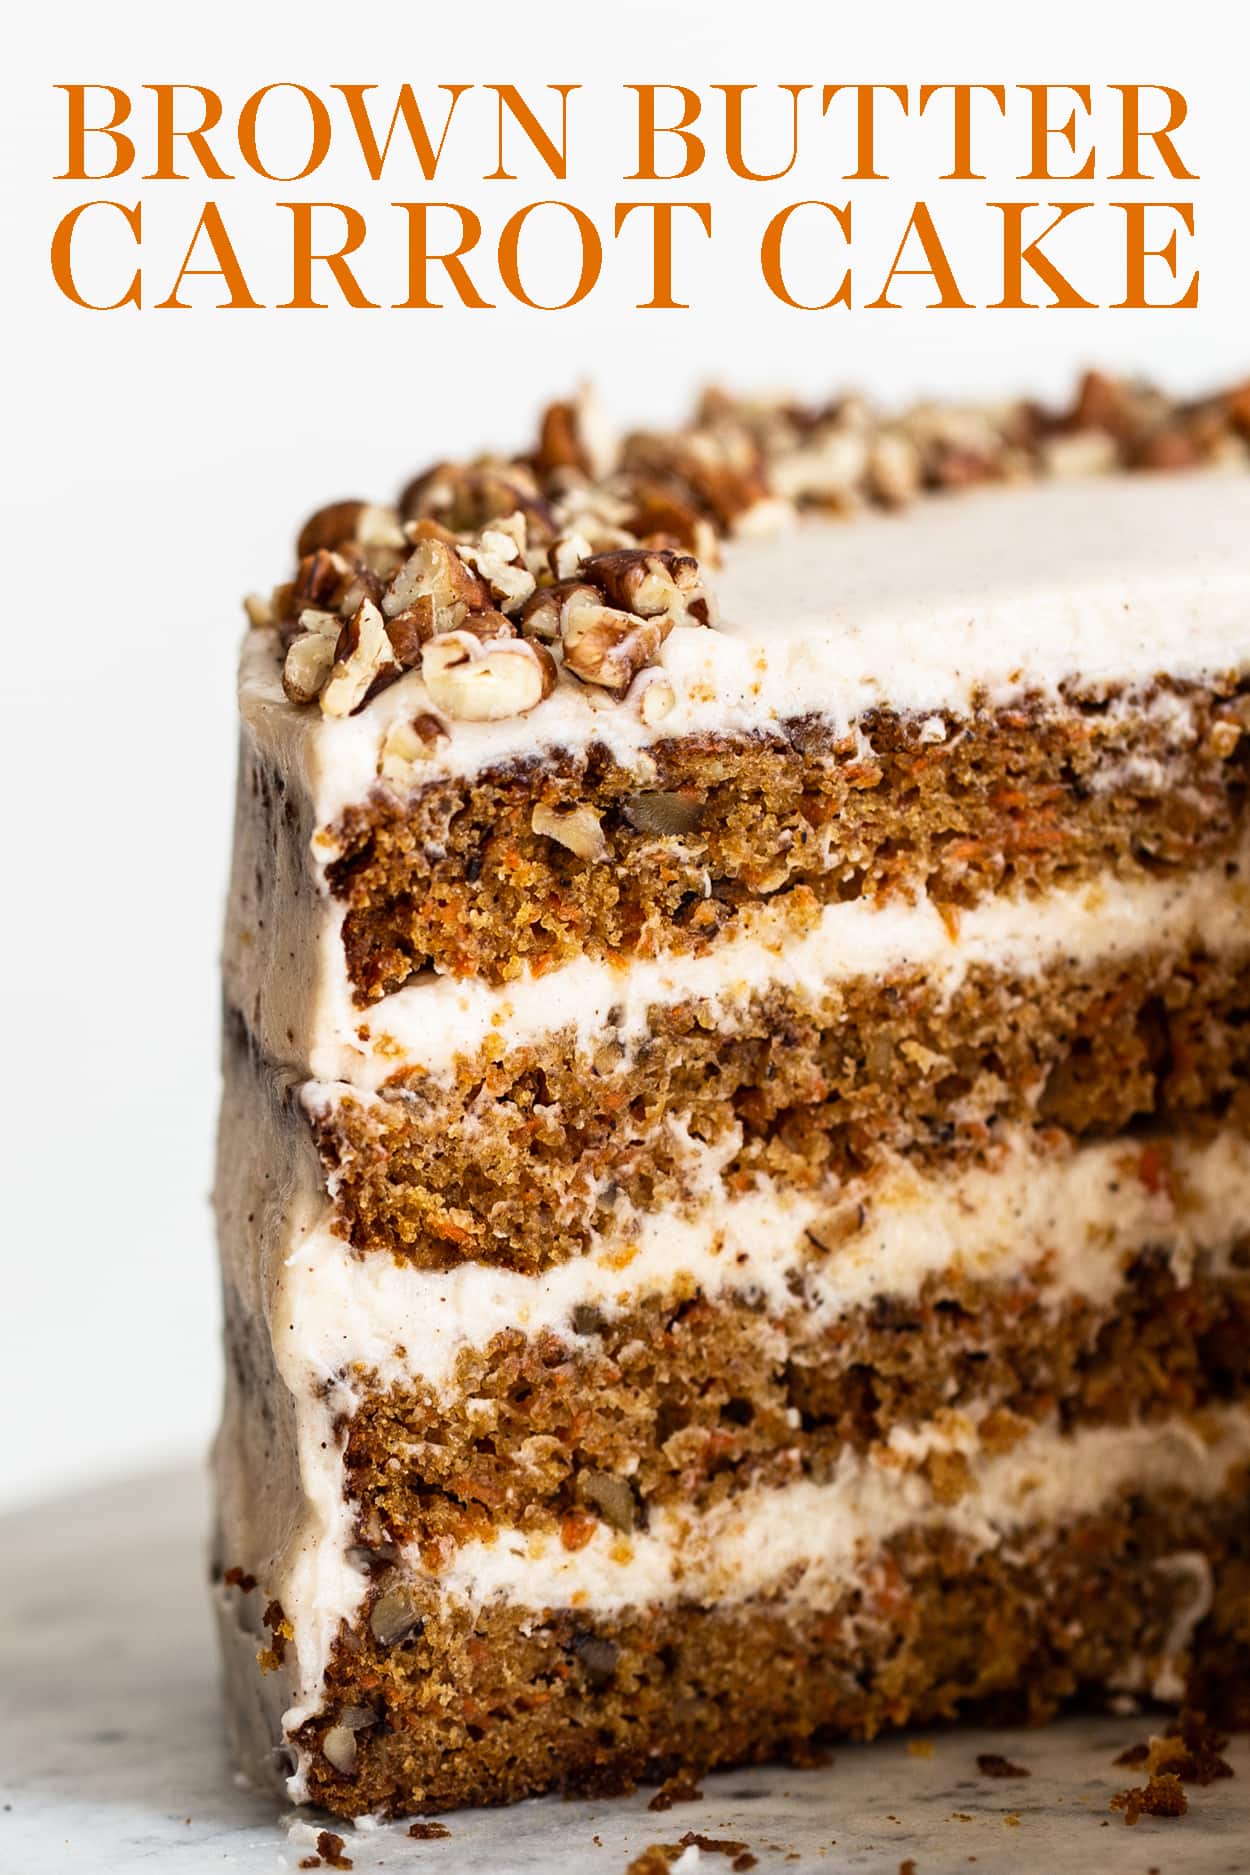 Brown Butter Carrot Cake with Cream Cheese Frosting